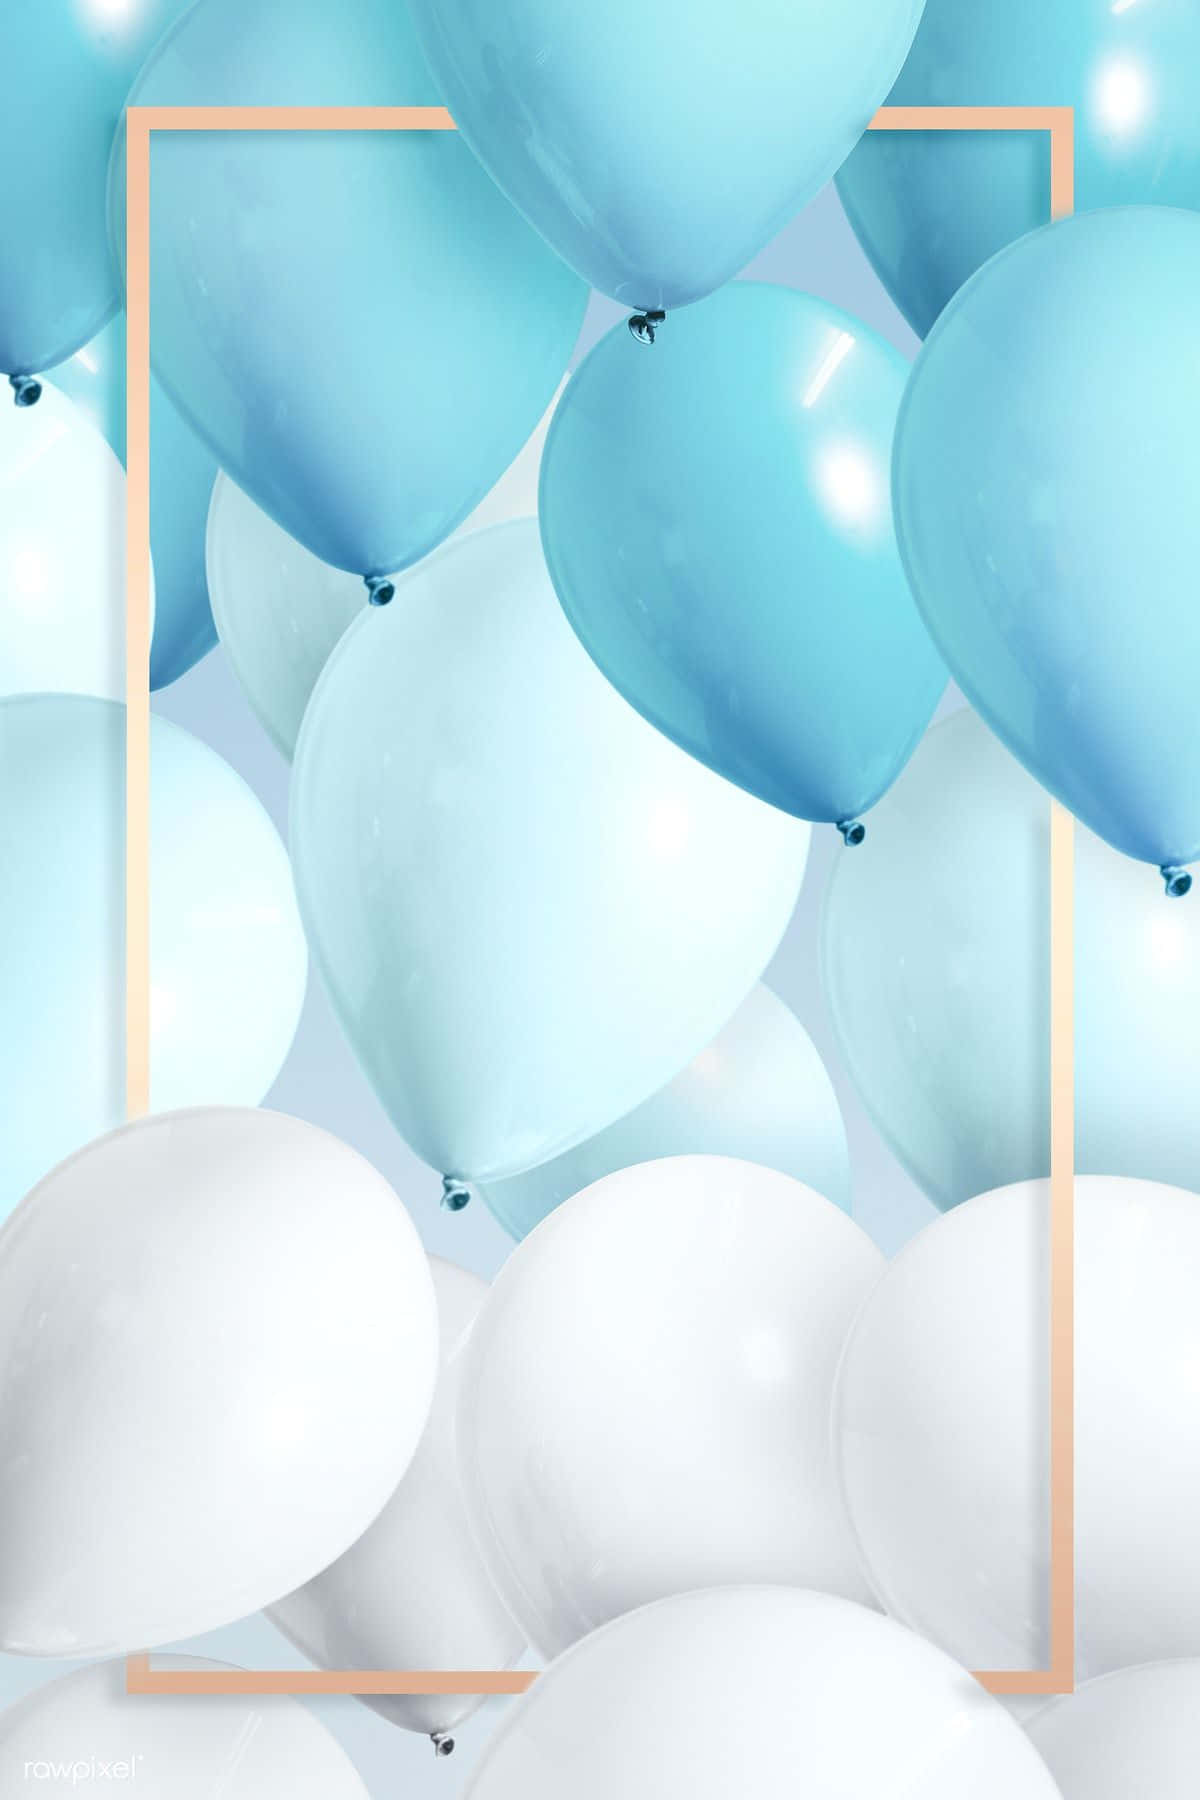 Blue And White Balloons In A Frame